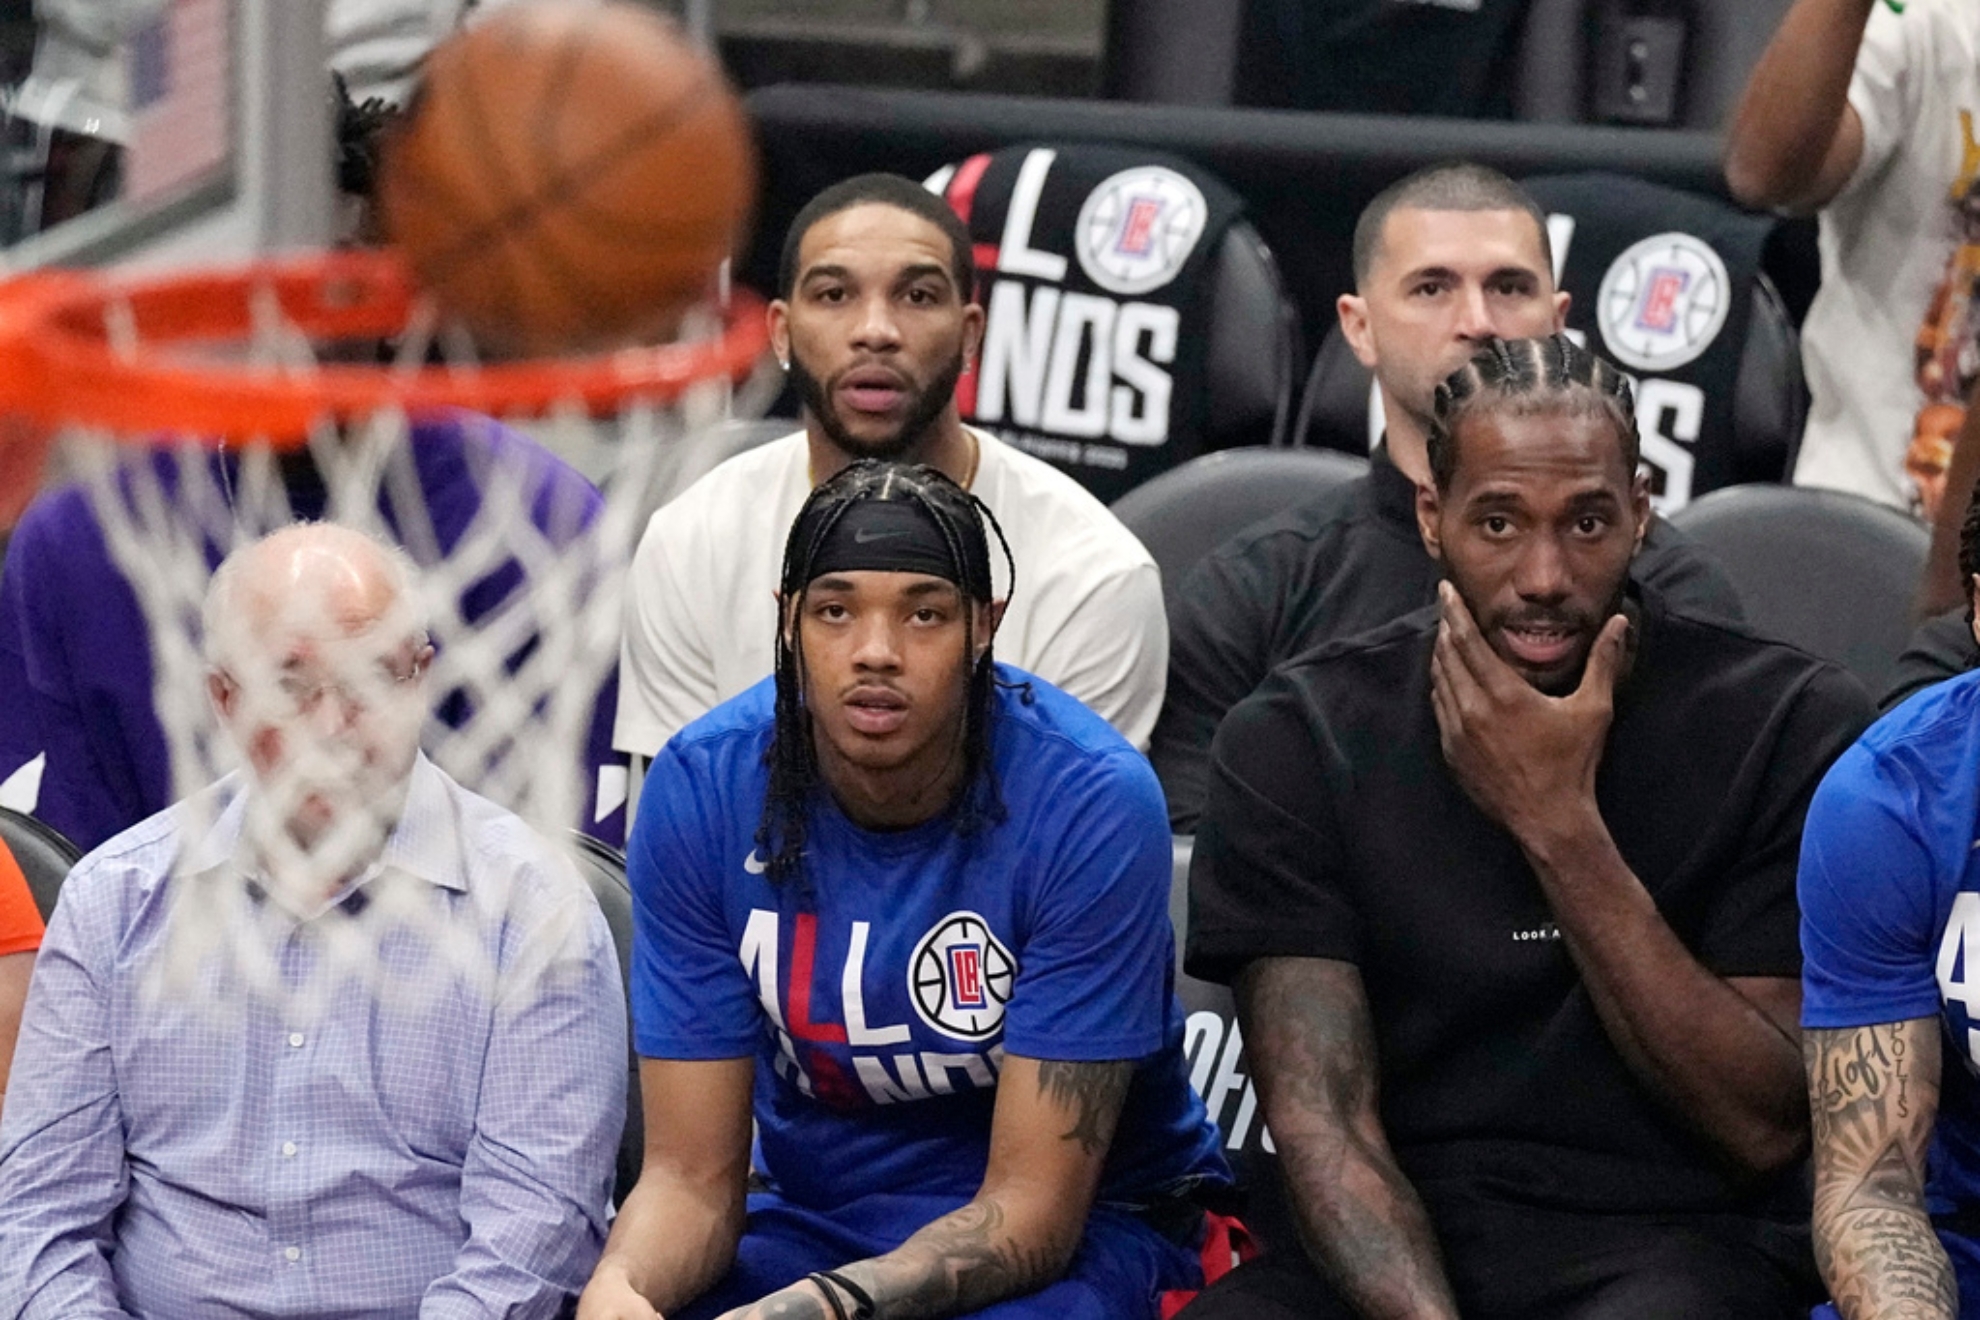 Kawhi Leonard has also been subject to load management controversies